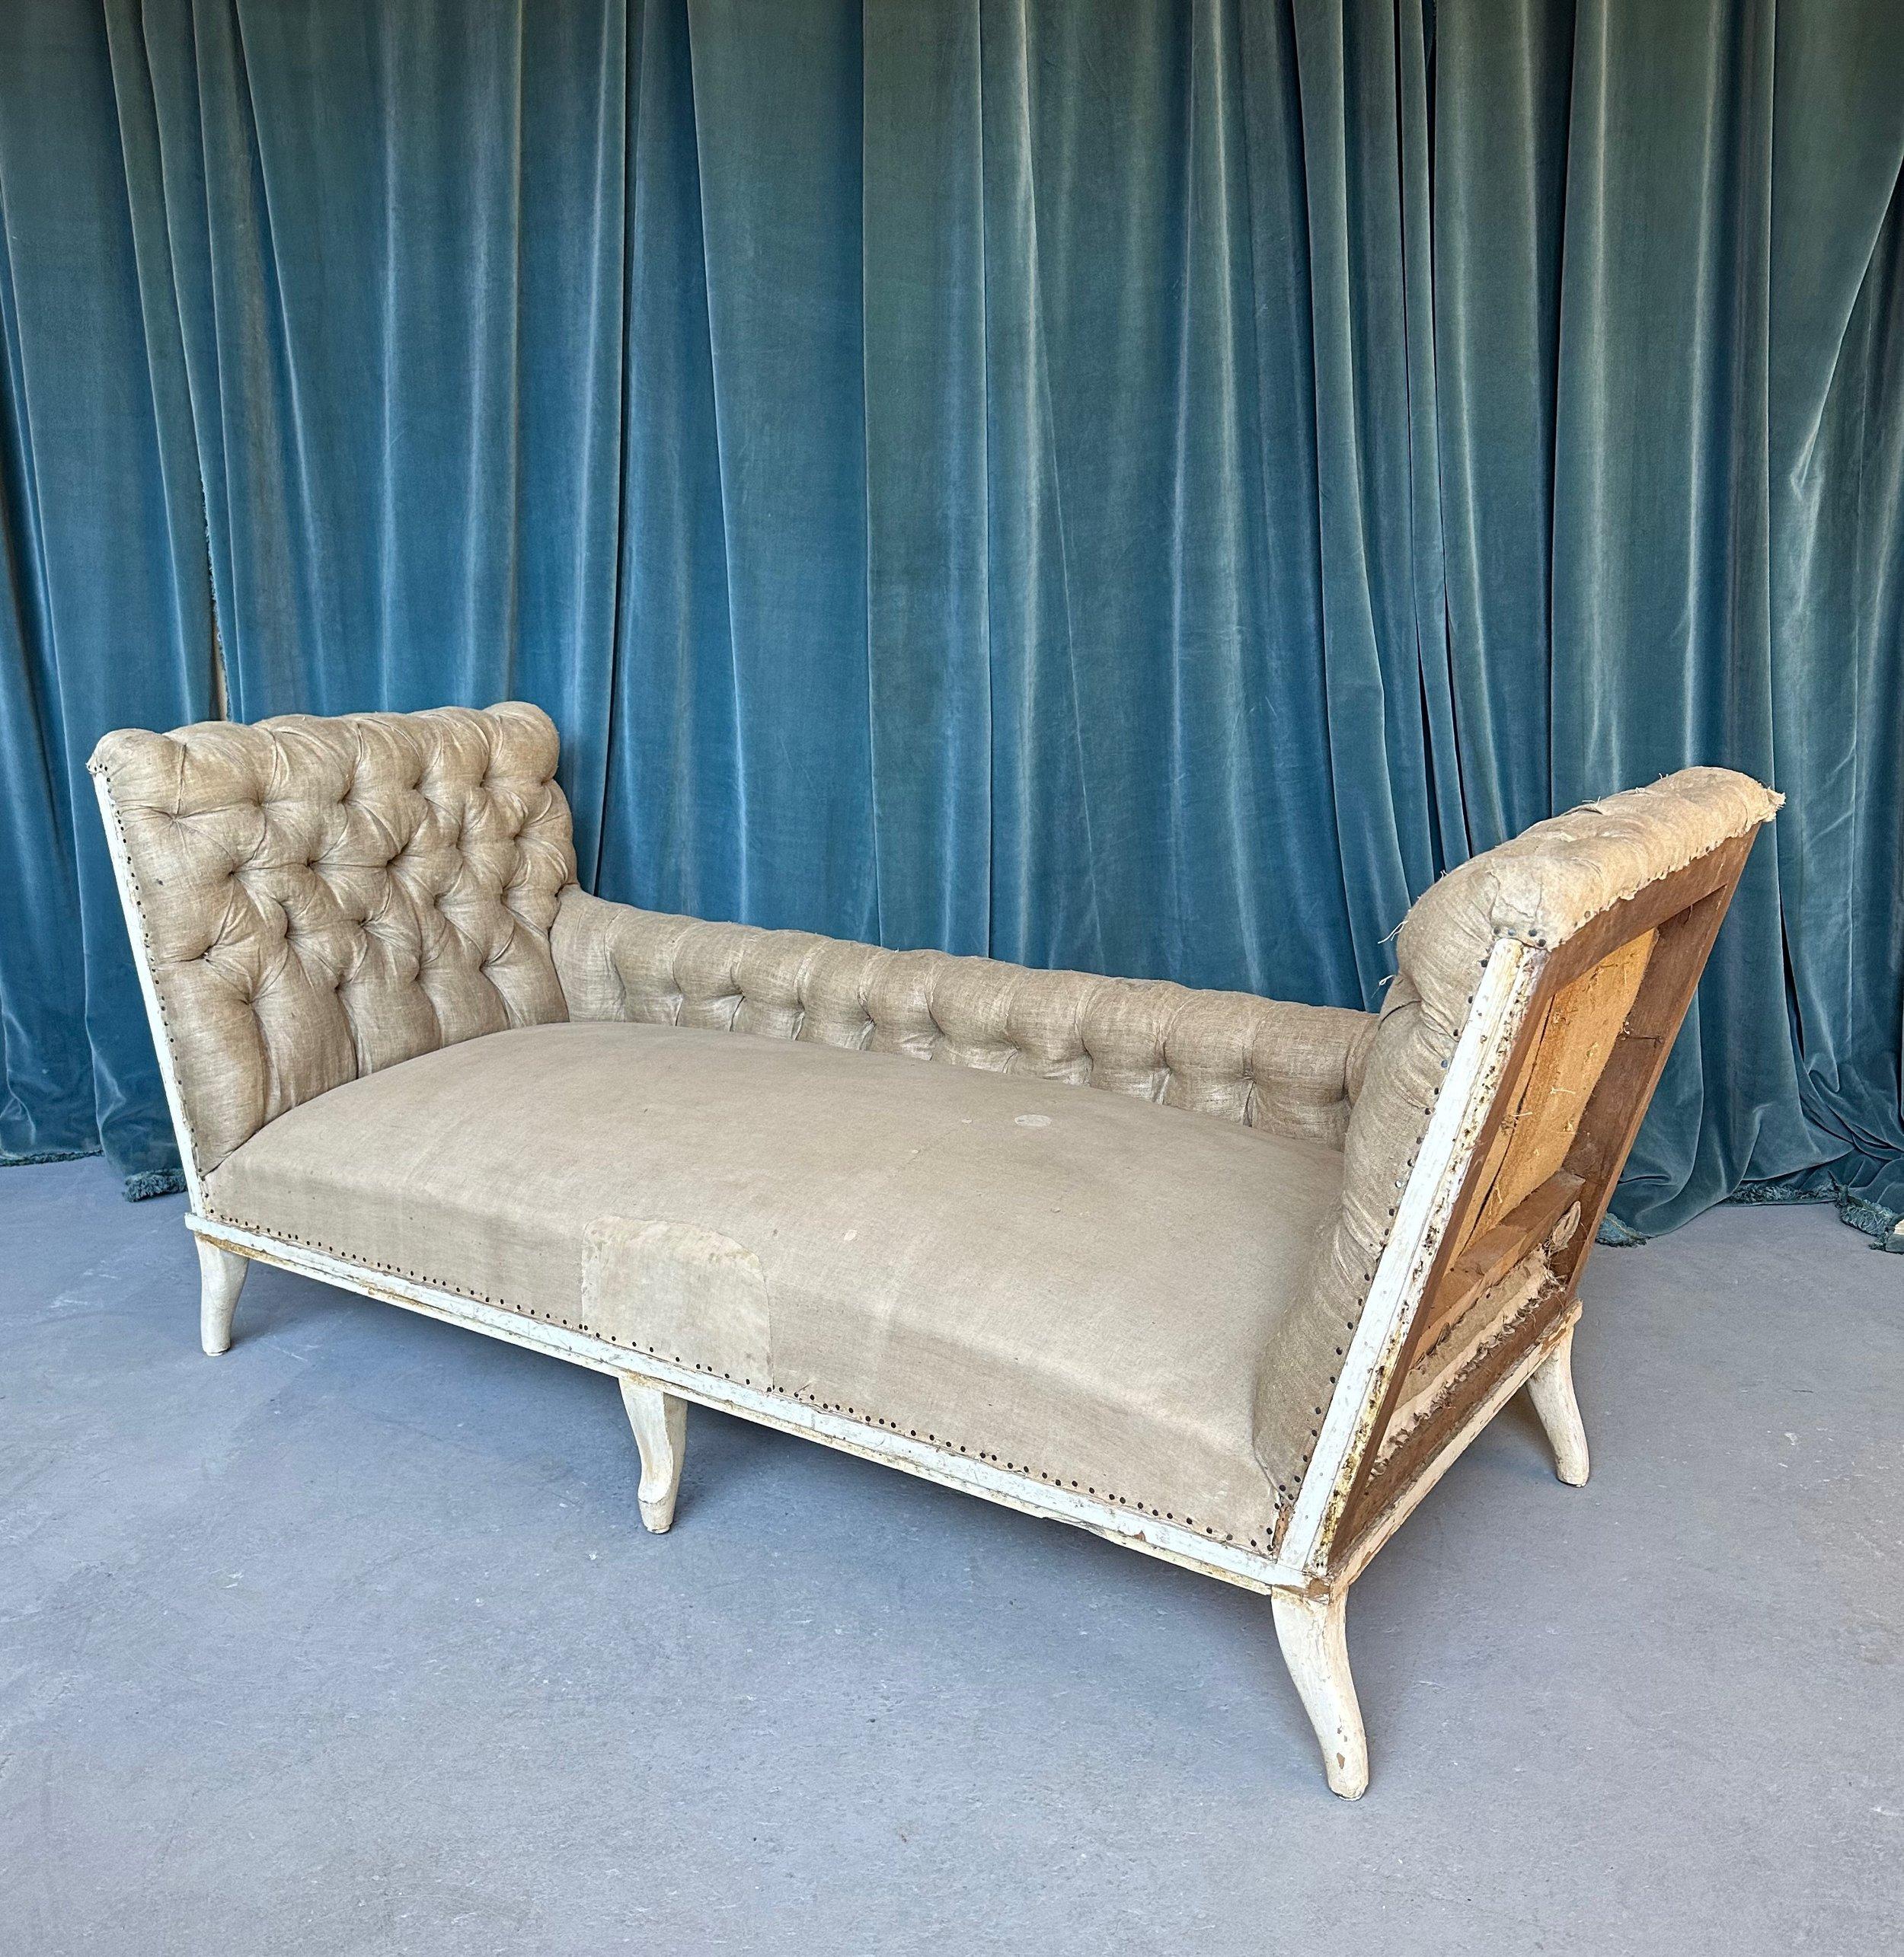 This unique and stately large scale French 19th century Napoleon III sofa features gracefully extended arms that contrast the low back and give this sofa a distinctly elegant appeal. The back and arms are masterfully and heavily tufted - adding to